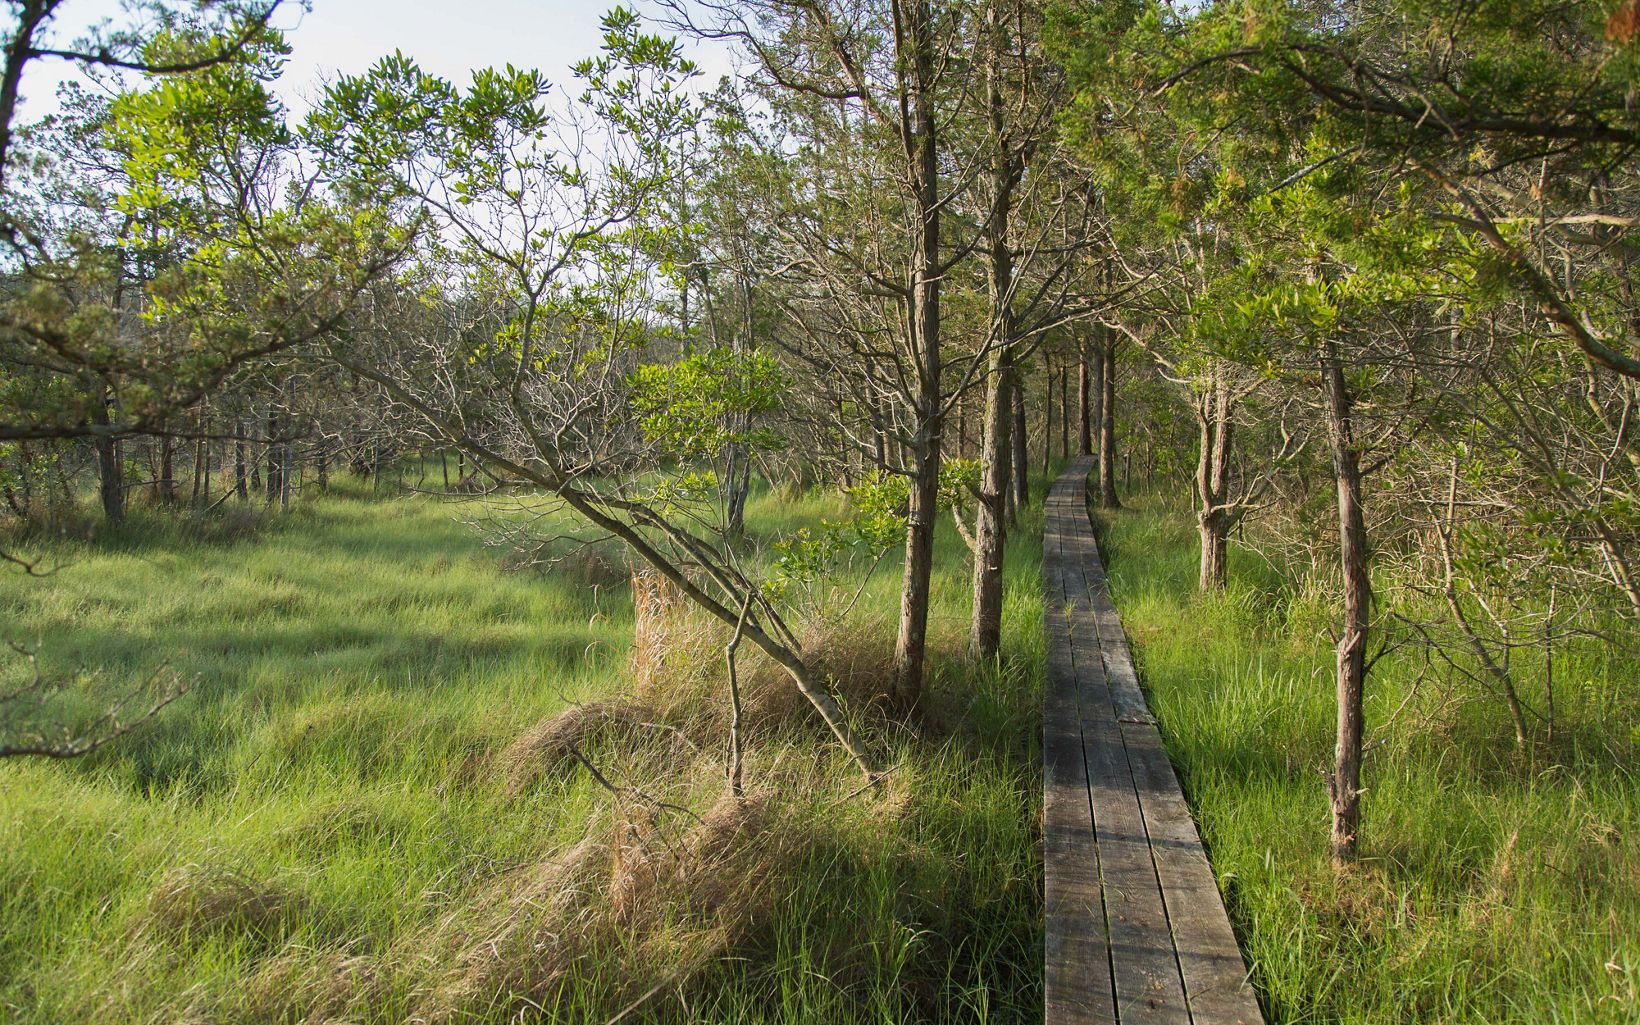 Brownsville Preserve Explore scenic marsh and forest habitats along Brownsville's three-mile (round trip) William B. Cummings Birding and Wildlife Trail. © Peter Frank Edwards